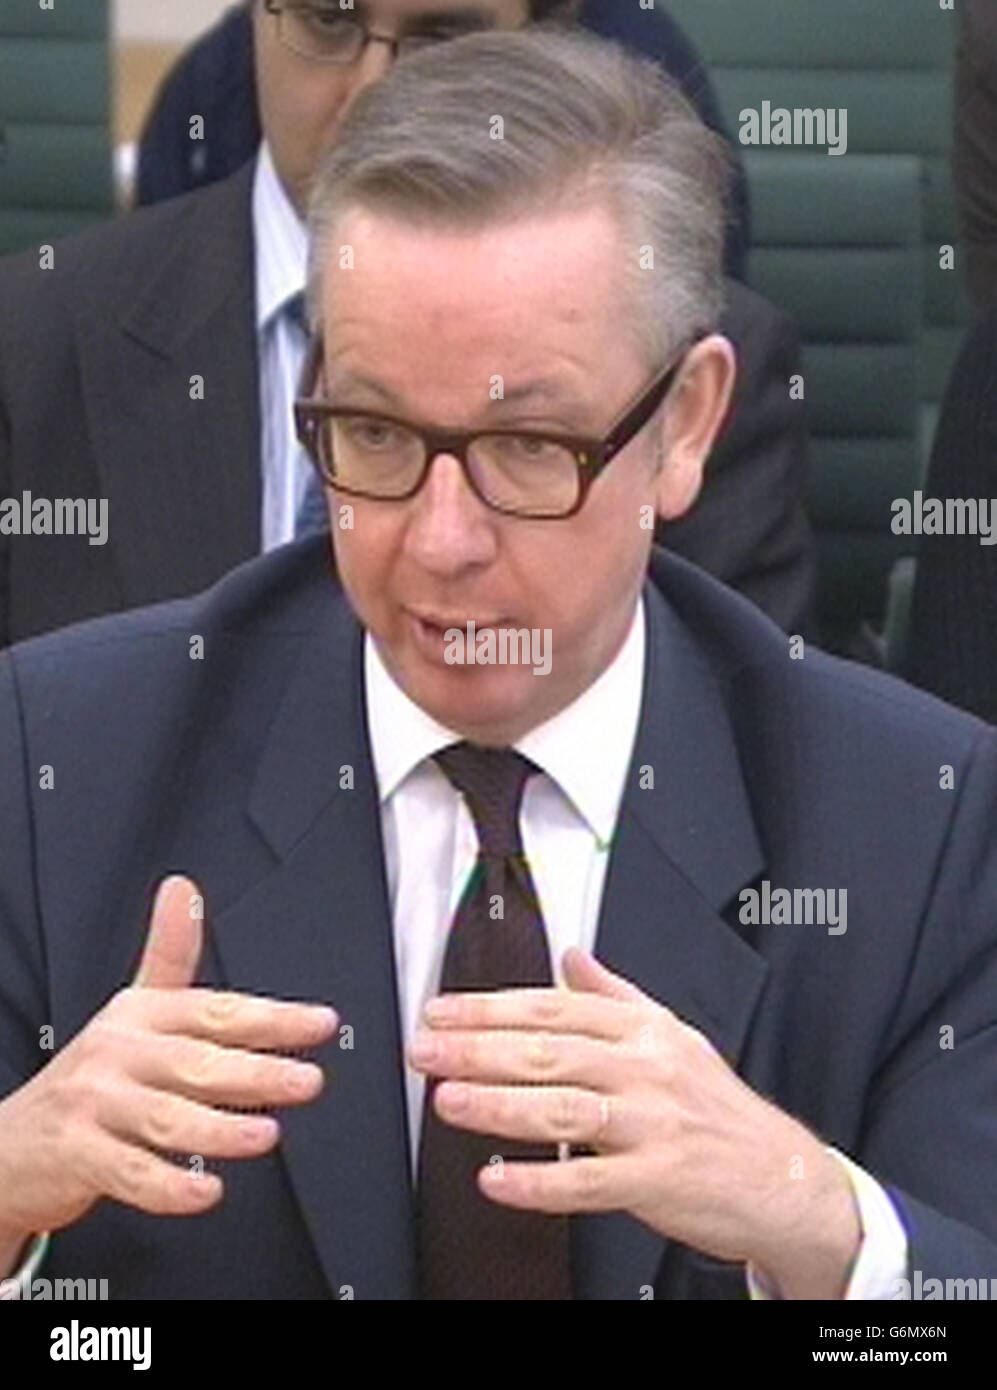 Education Secretary Michael Gove answers questions at a House of Commons Education Select Committee on school accountability, qualifications and curriculum reform at Portcullis House in London. Stock Photo